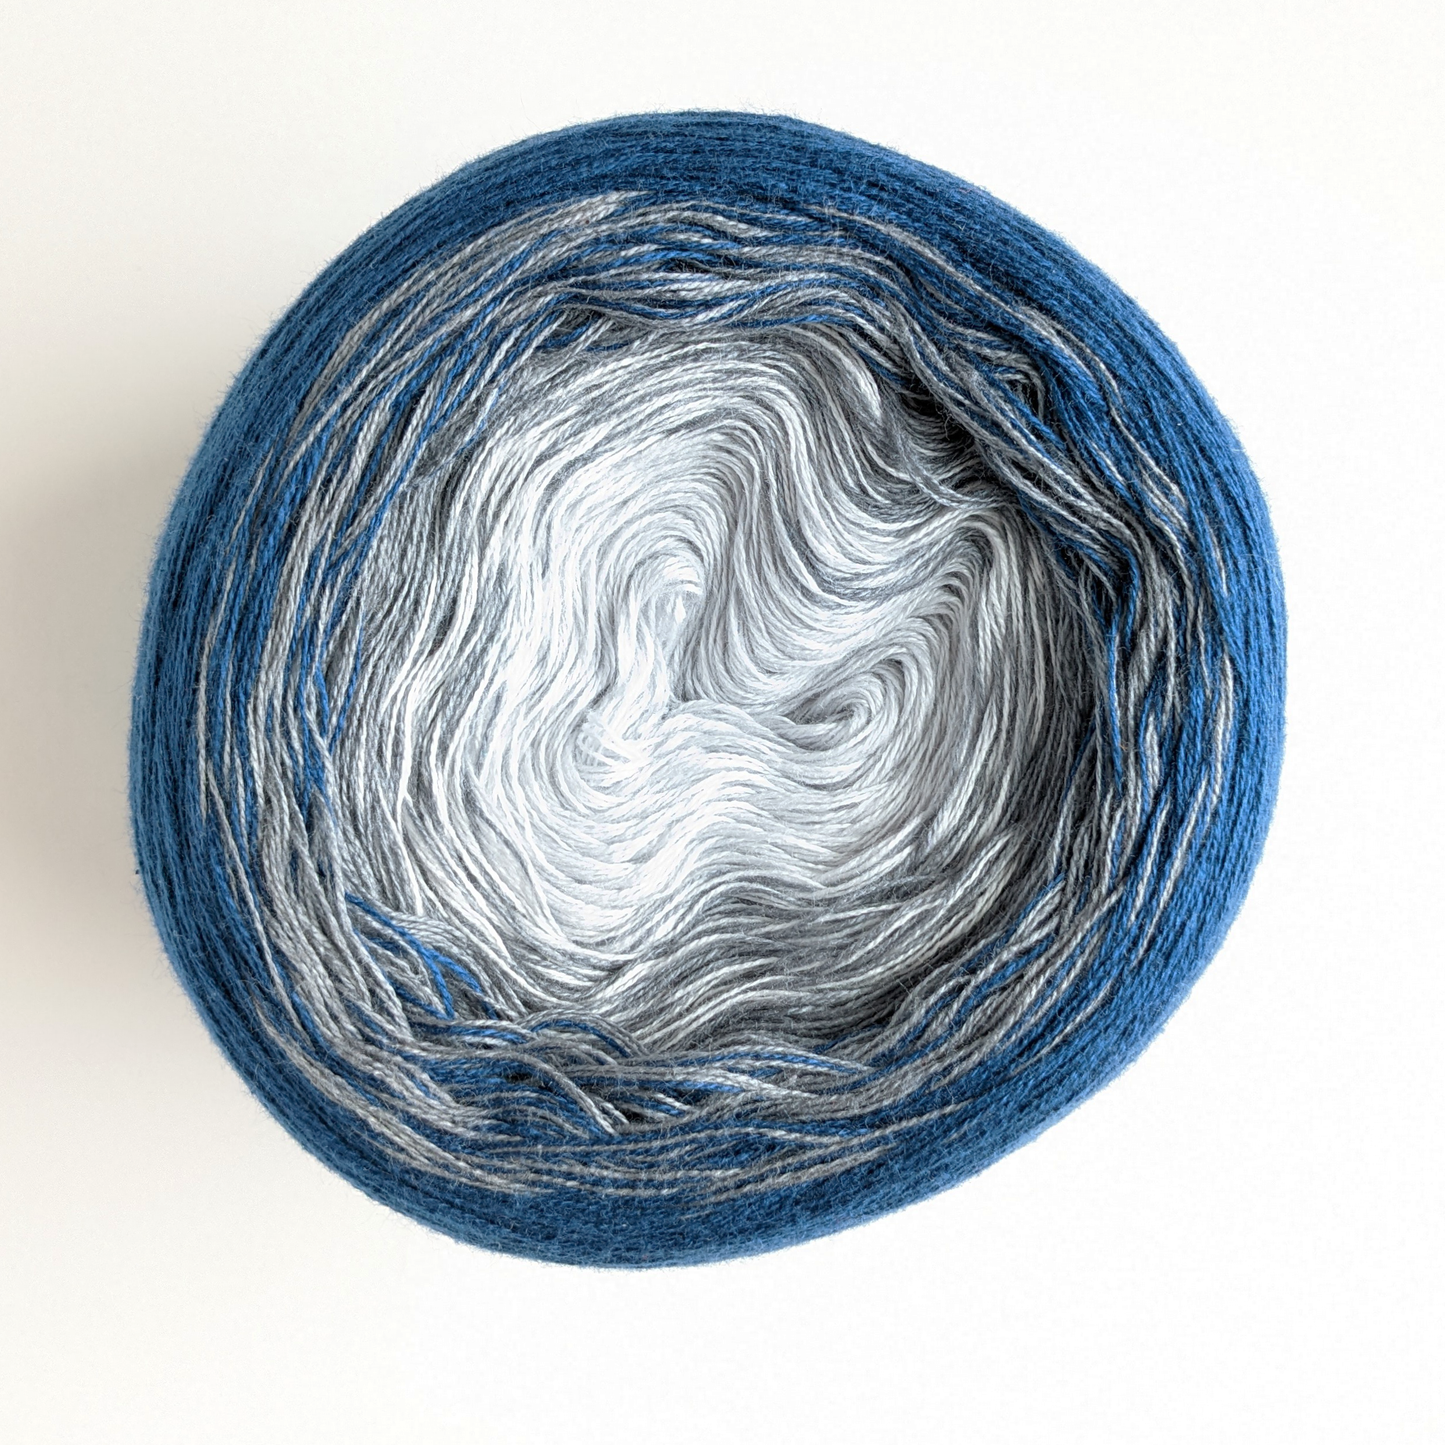 The Wolltraum gradient yarn colour Atlantis.  It includes shades of grey and a deep blue.  This cake has a light grey centre.